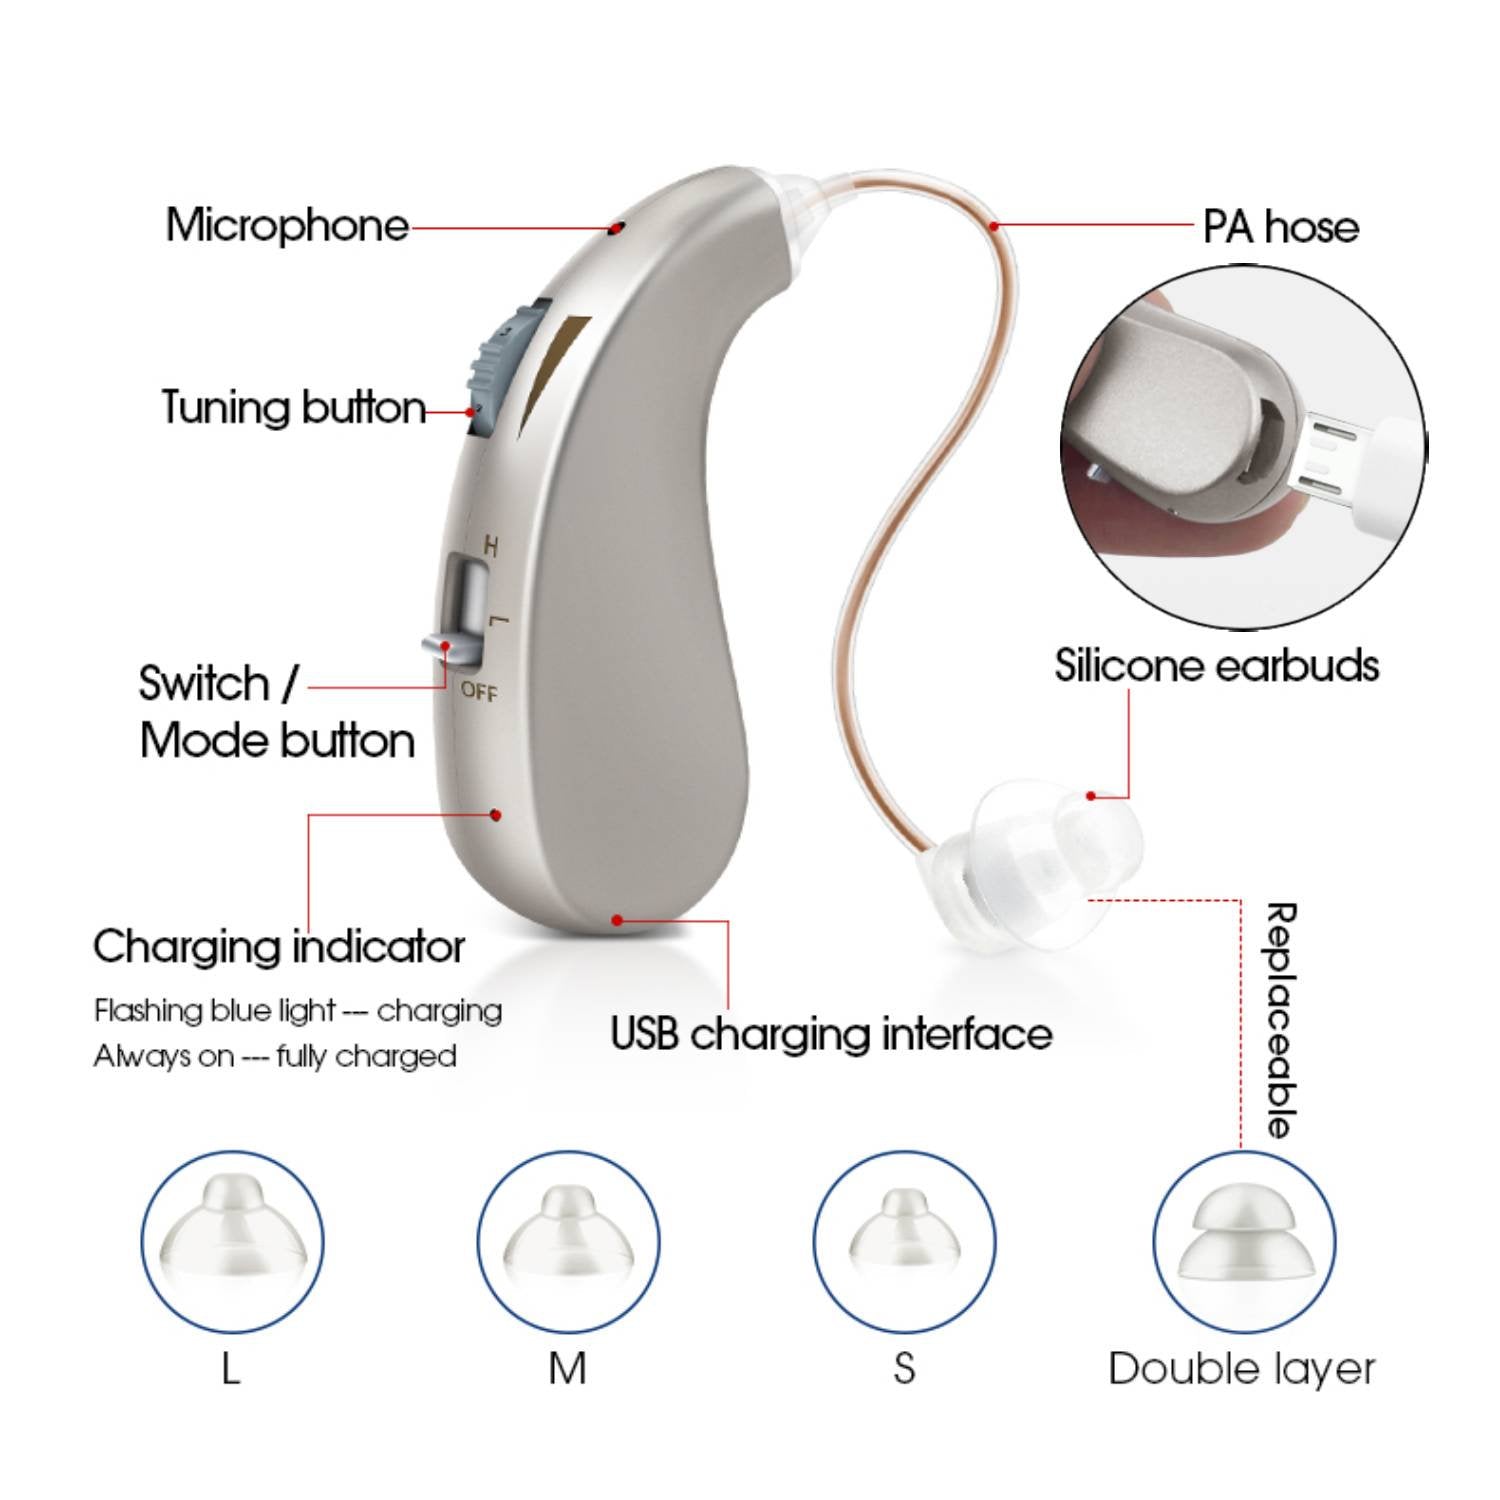 Doosl Rechargeable Hearing Aids for Seniors and Adults, Best Digital Hearing Amplifiers with Noise Canceling, Hearing Devices with USB Charging cable, Silver